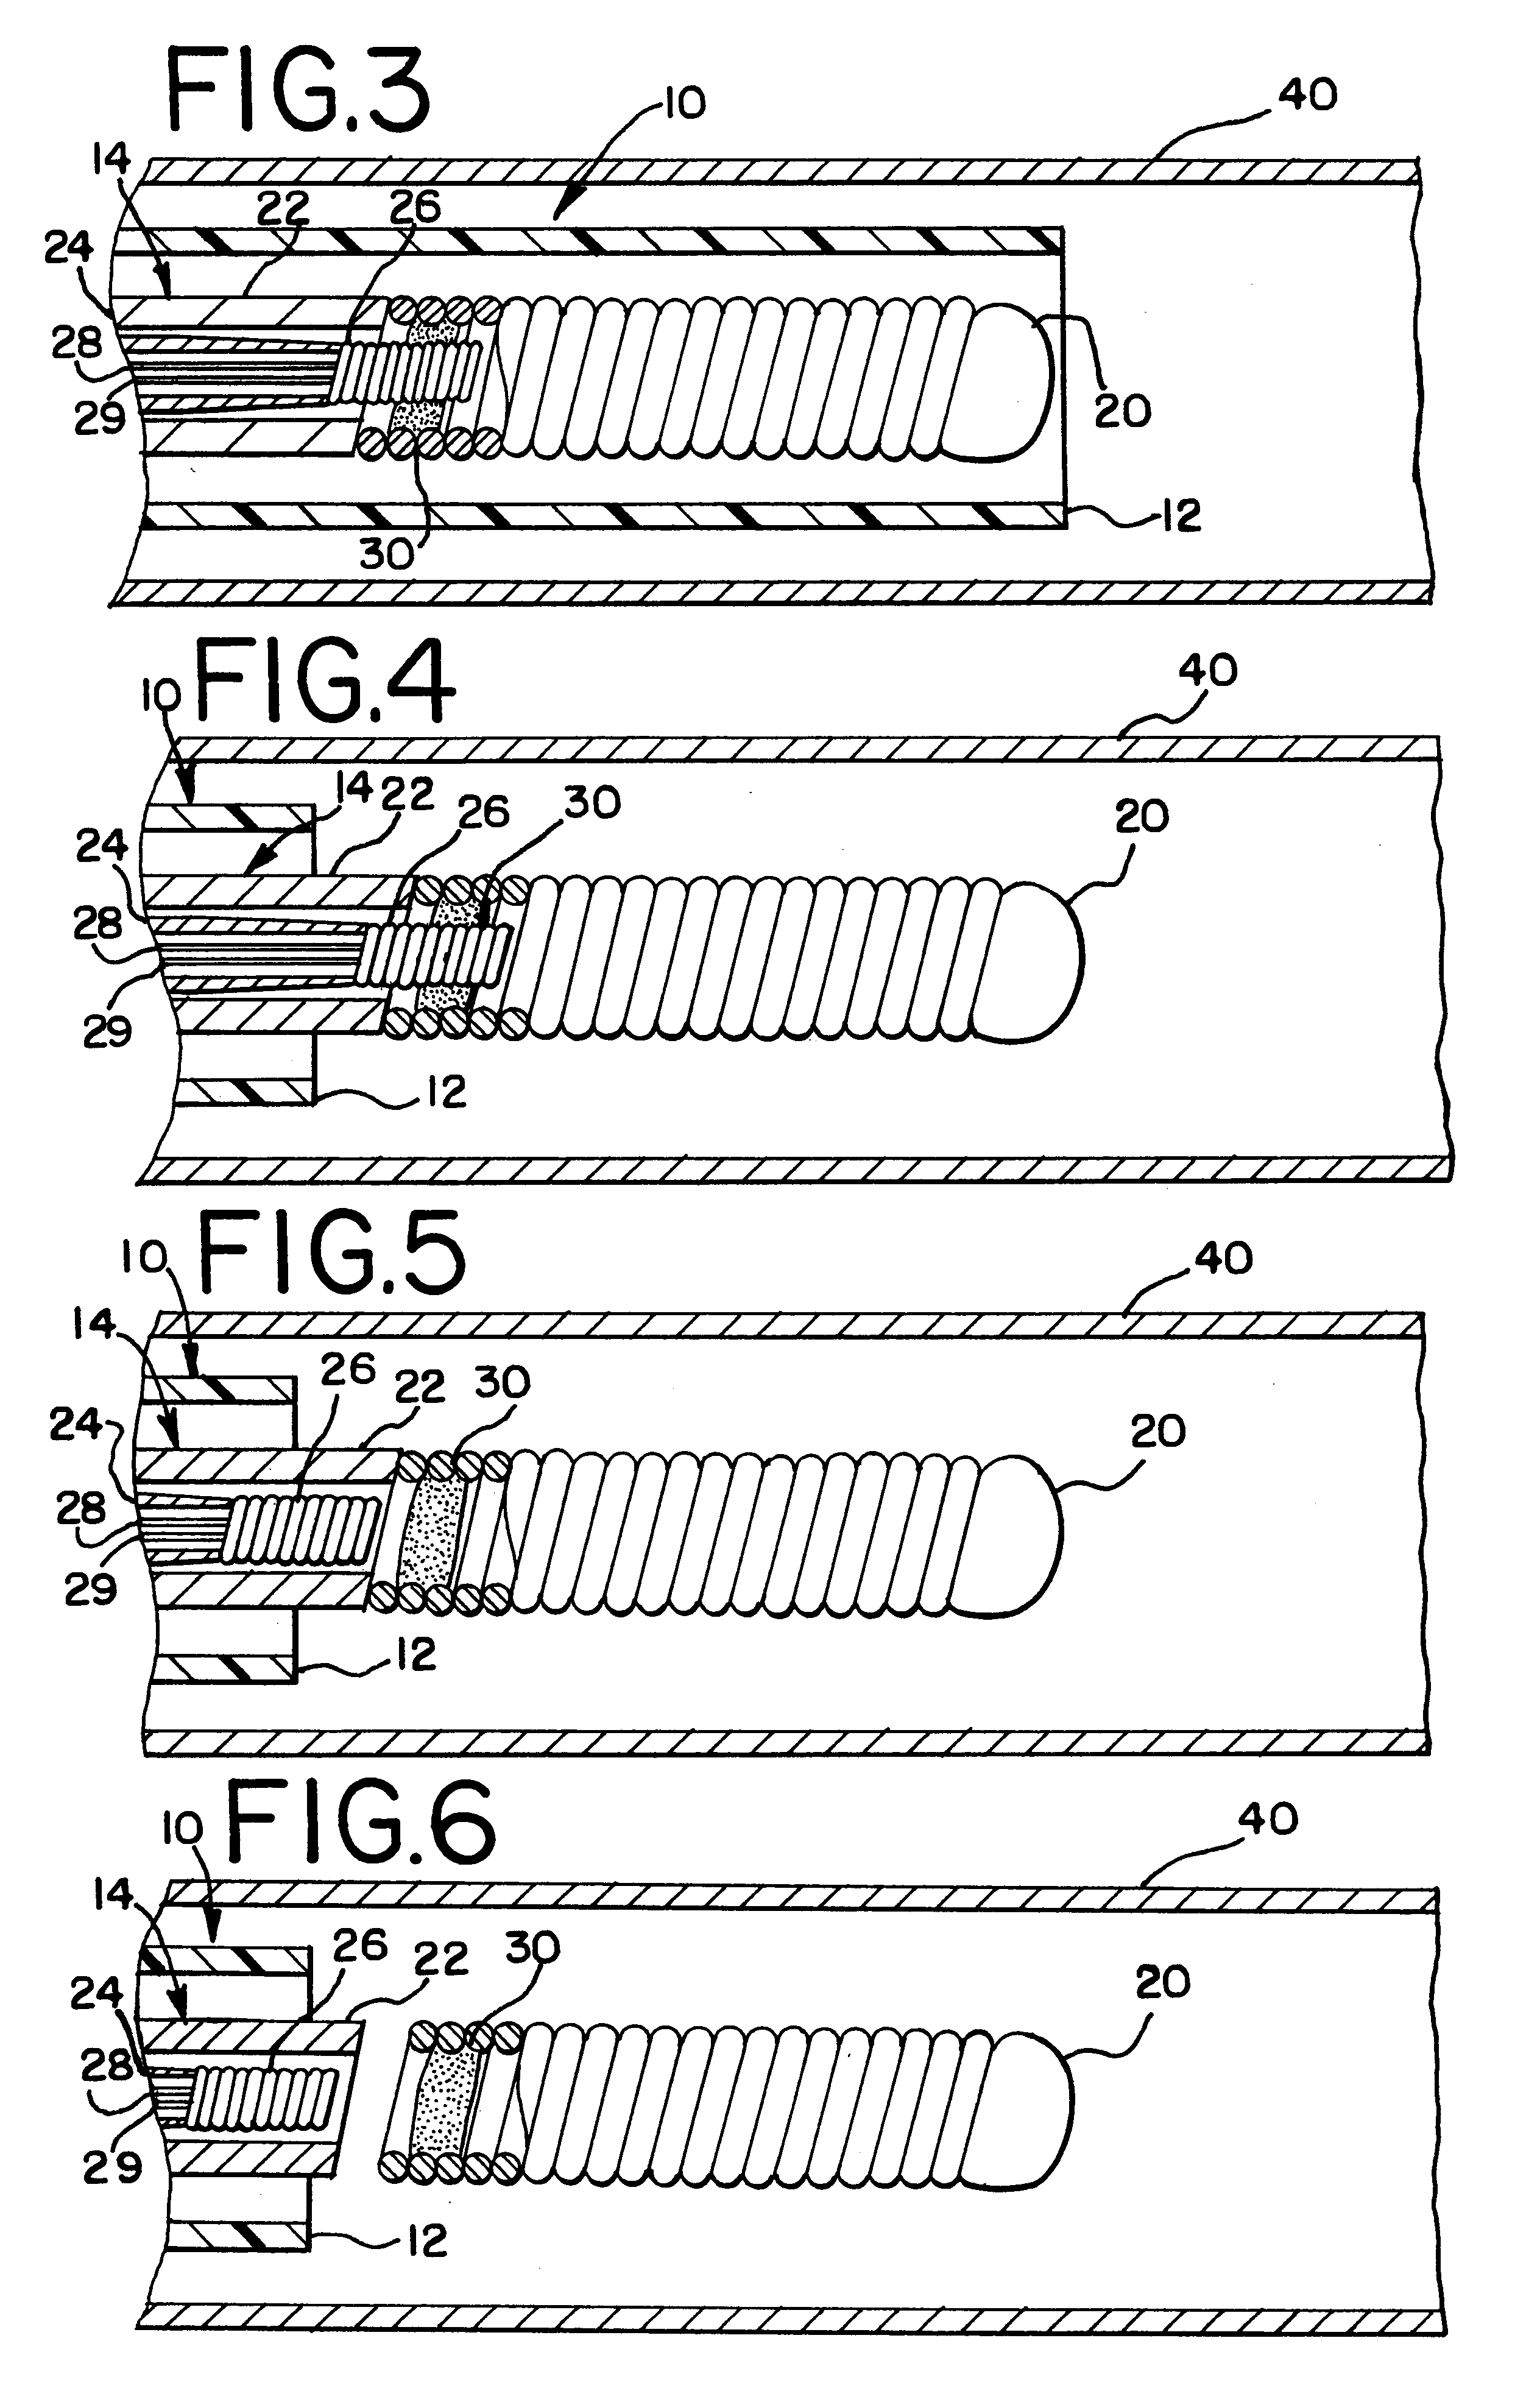 Heated vascular occlusion coil development system